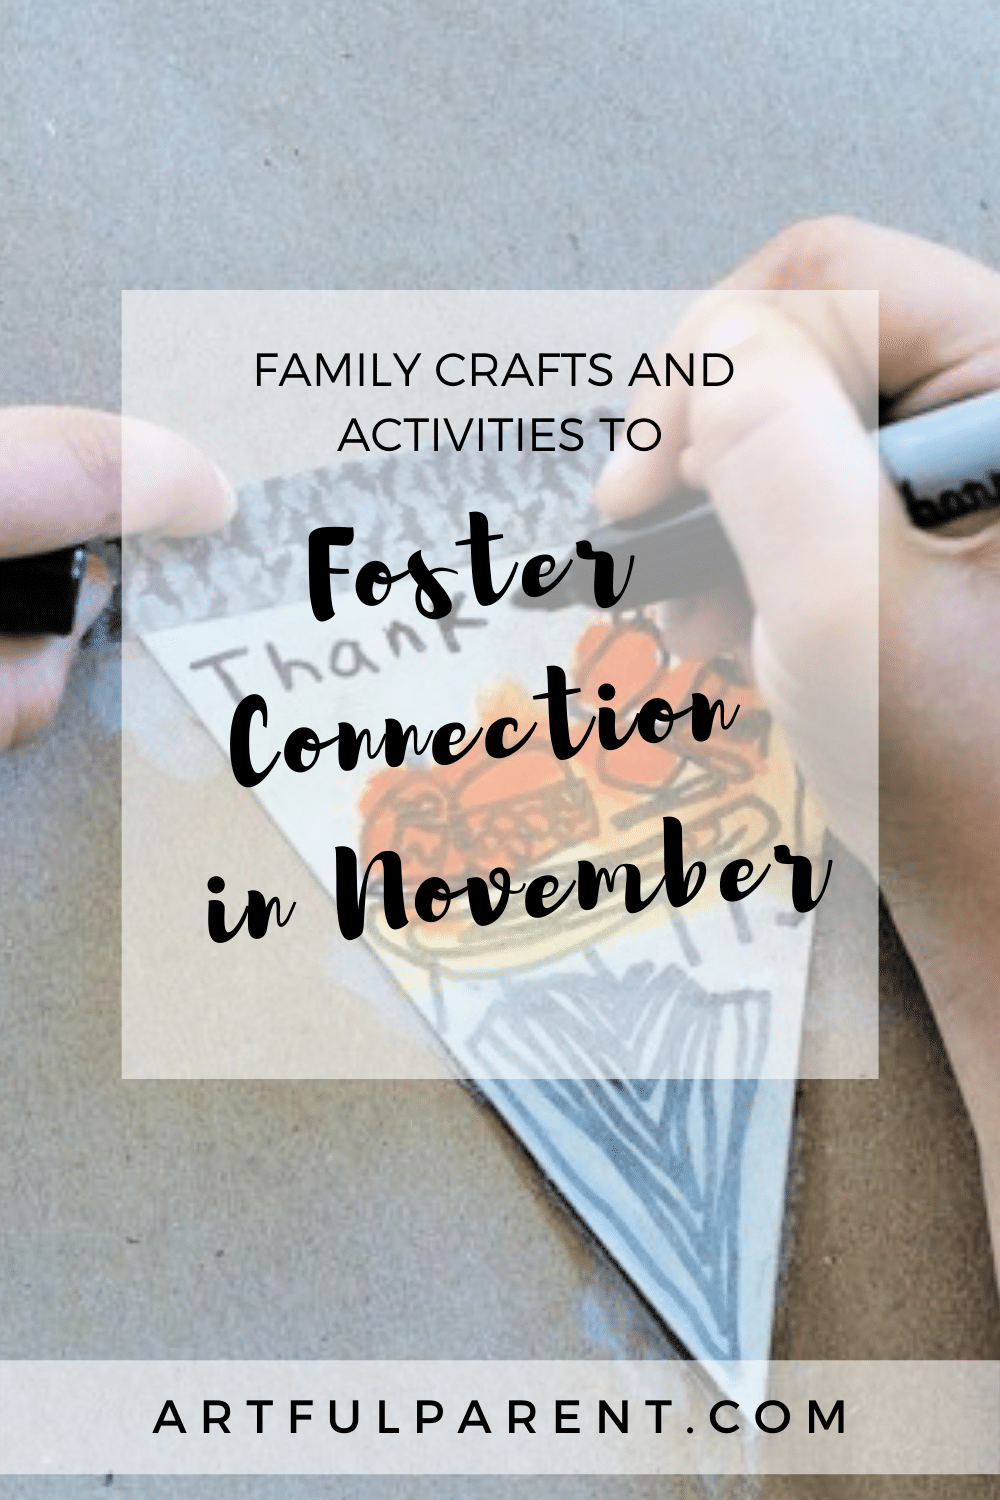 13 November Crafts and Activities for Family Connection & Celebration